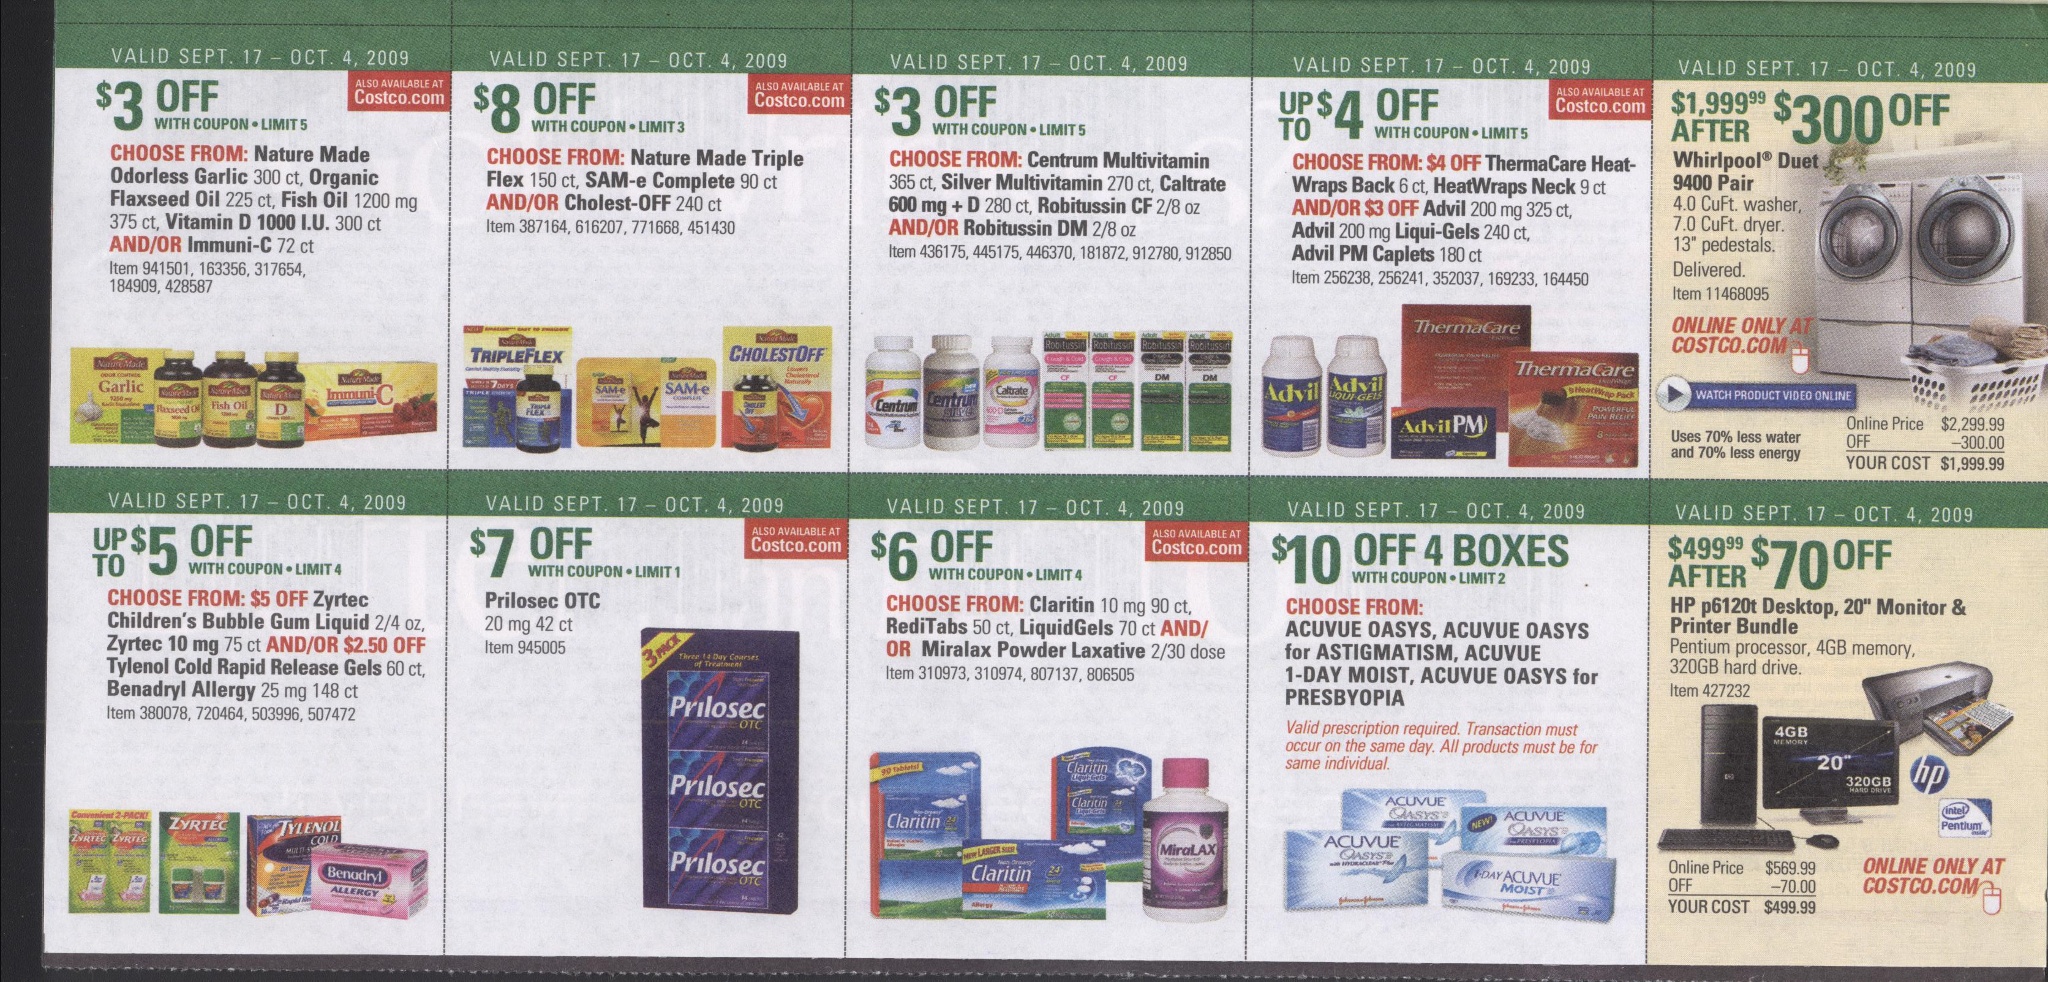 Full image coupon book page ->10<-